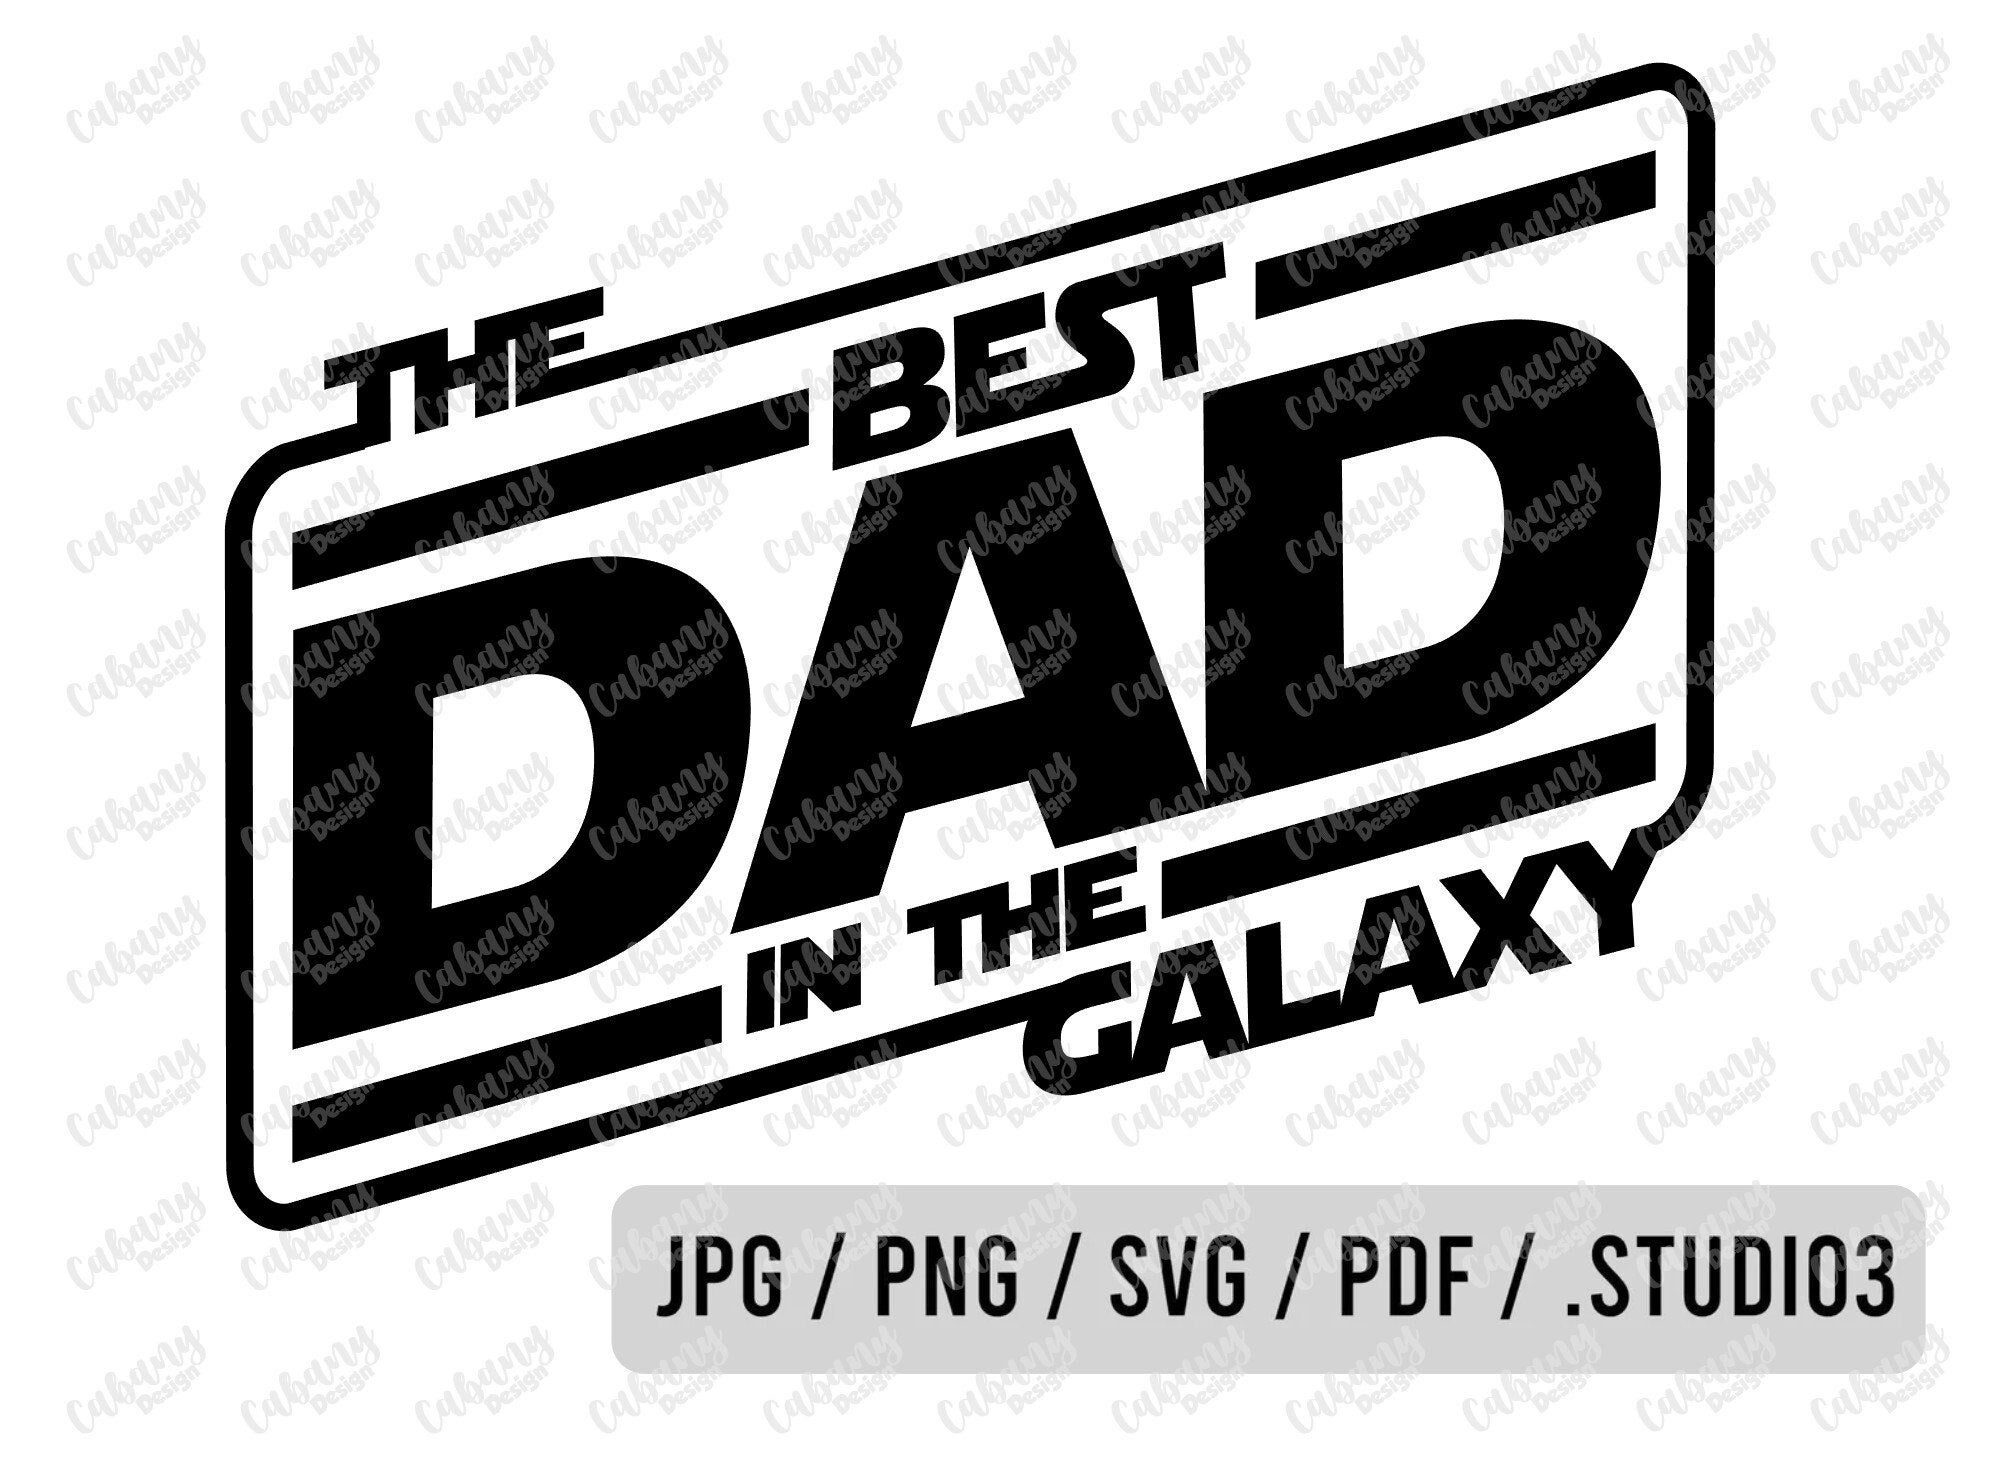 Dad with Swoosh Svg Graphic by sadiqul7383 · Creative Fabrica